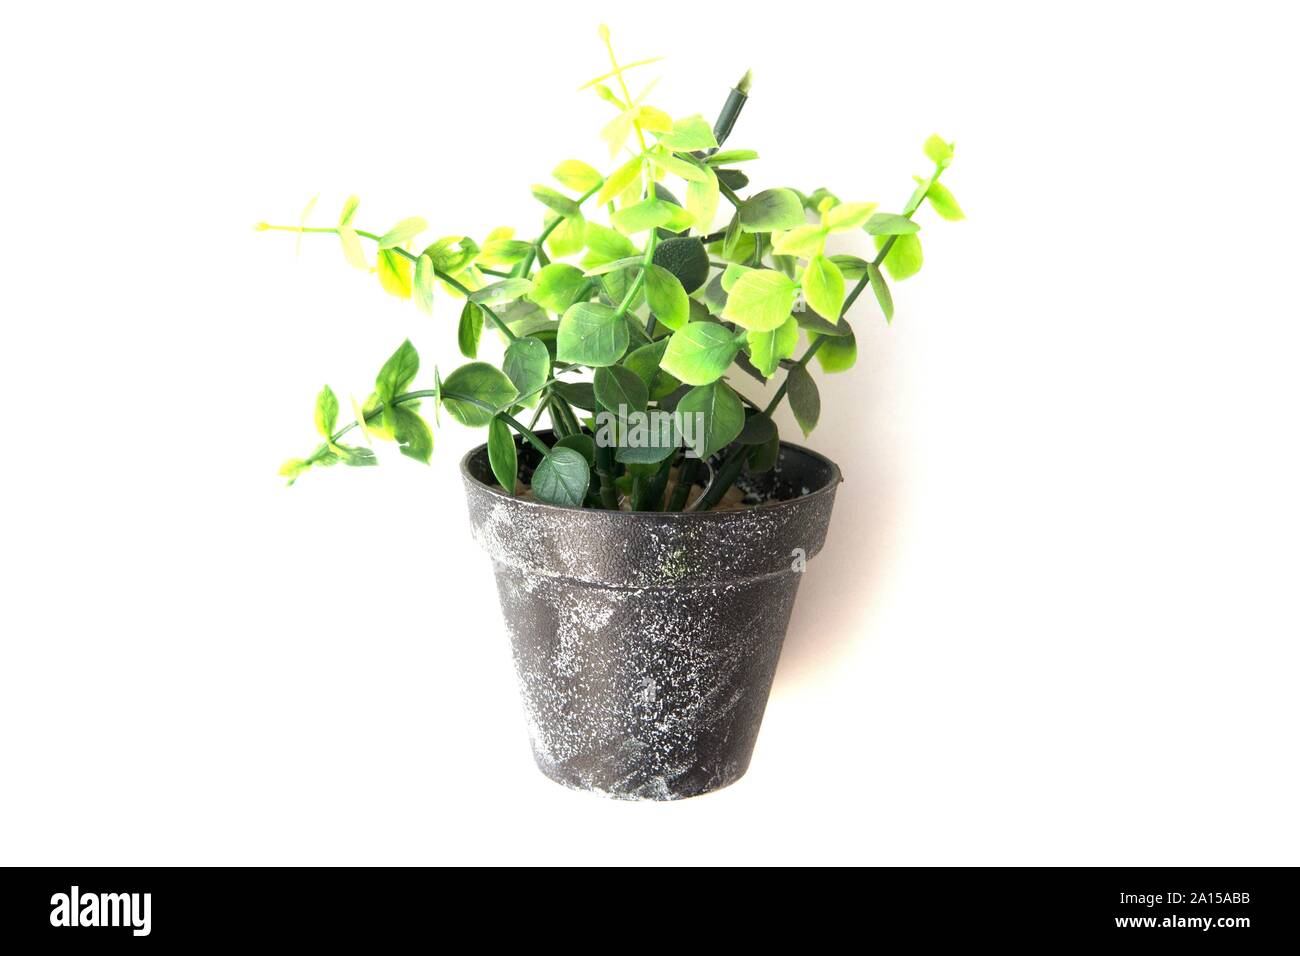 Potted plastic plants and flowers for decorations. Container made of aluminium, plastic, ceramic as well as clay. Plants include Cactus, cacti, beauti Stock Photo